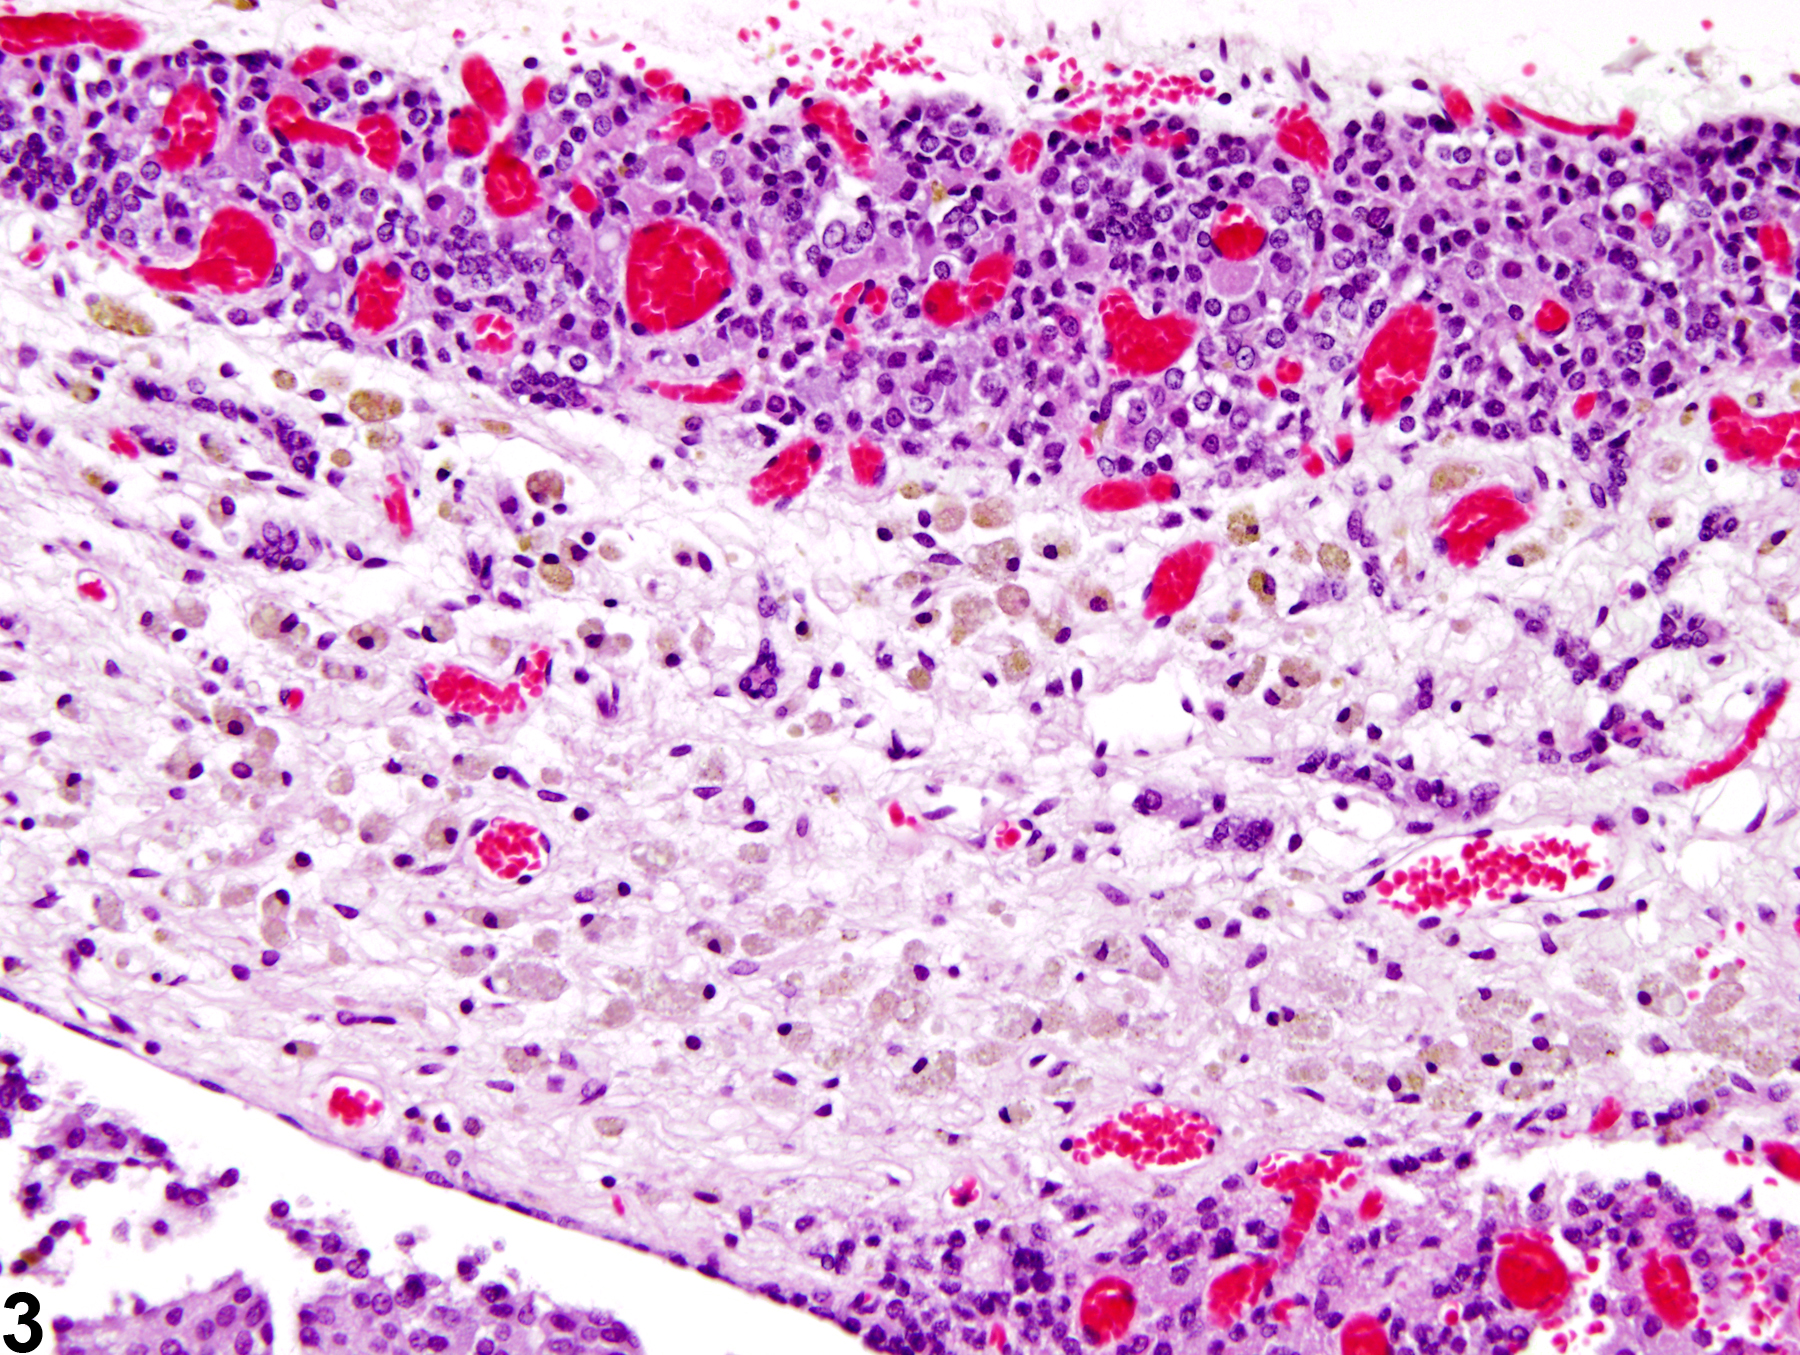 Image of pars distalis atrophy in the pituitary gland from a female F344/N rat in a chronic study